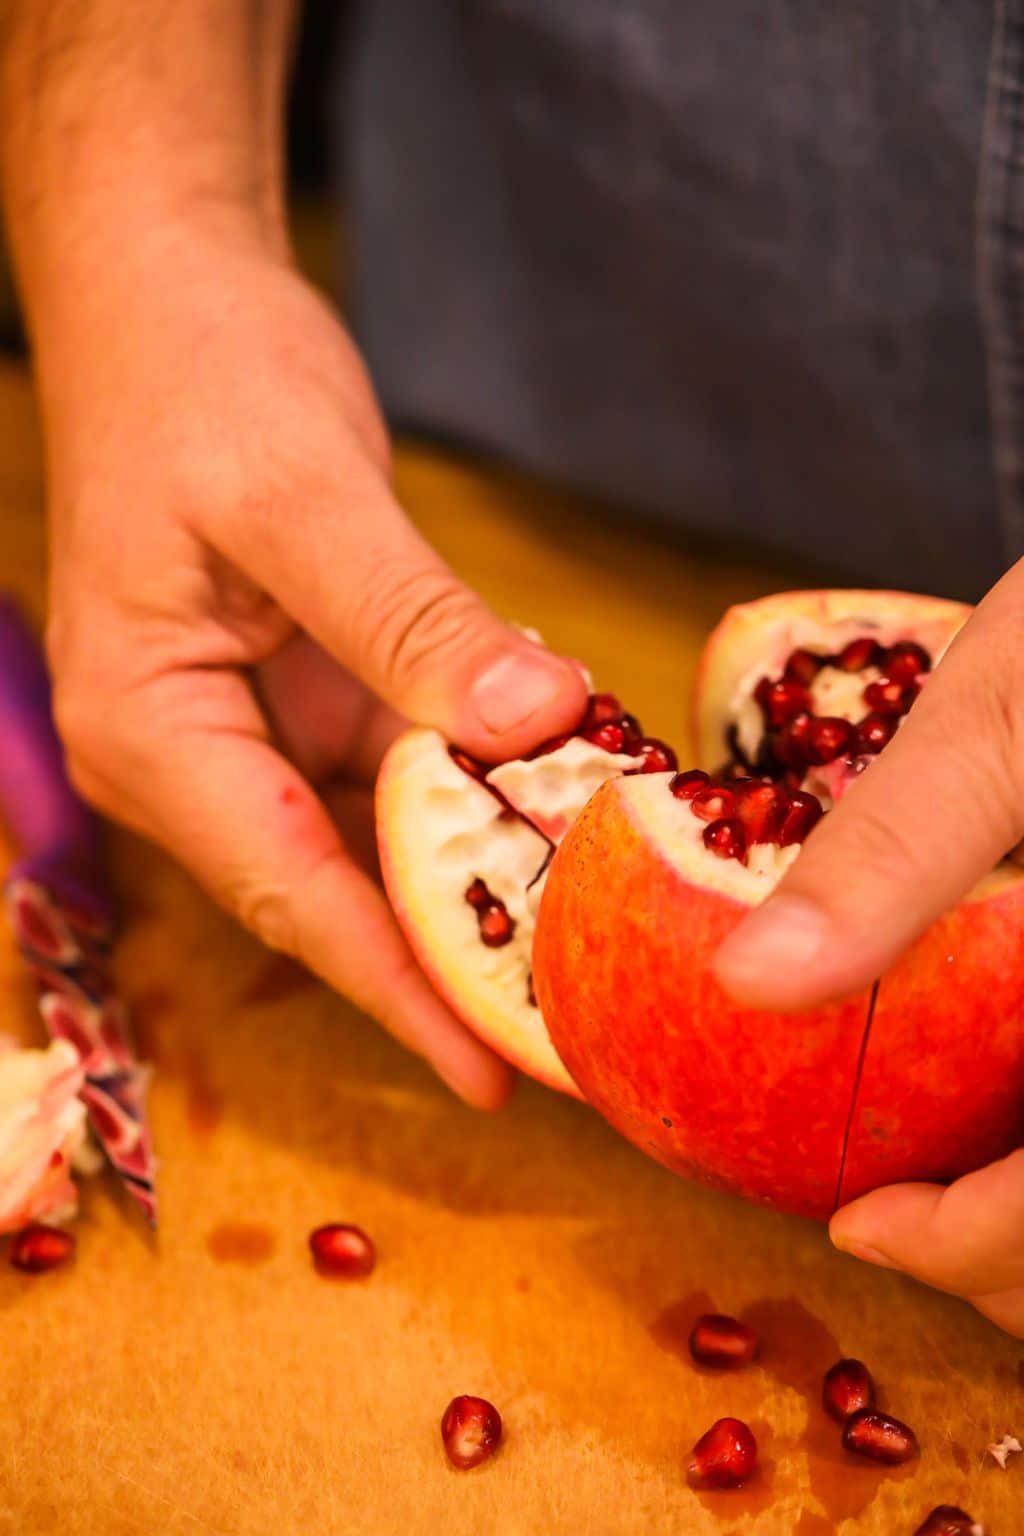 how to peel a pomegranate